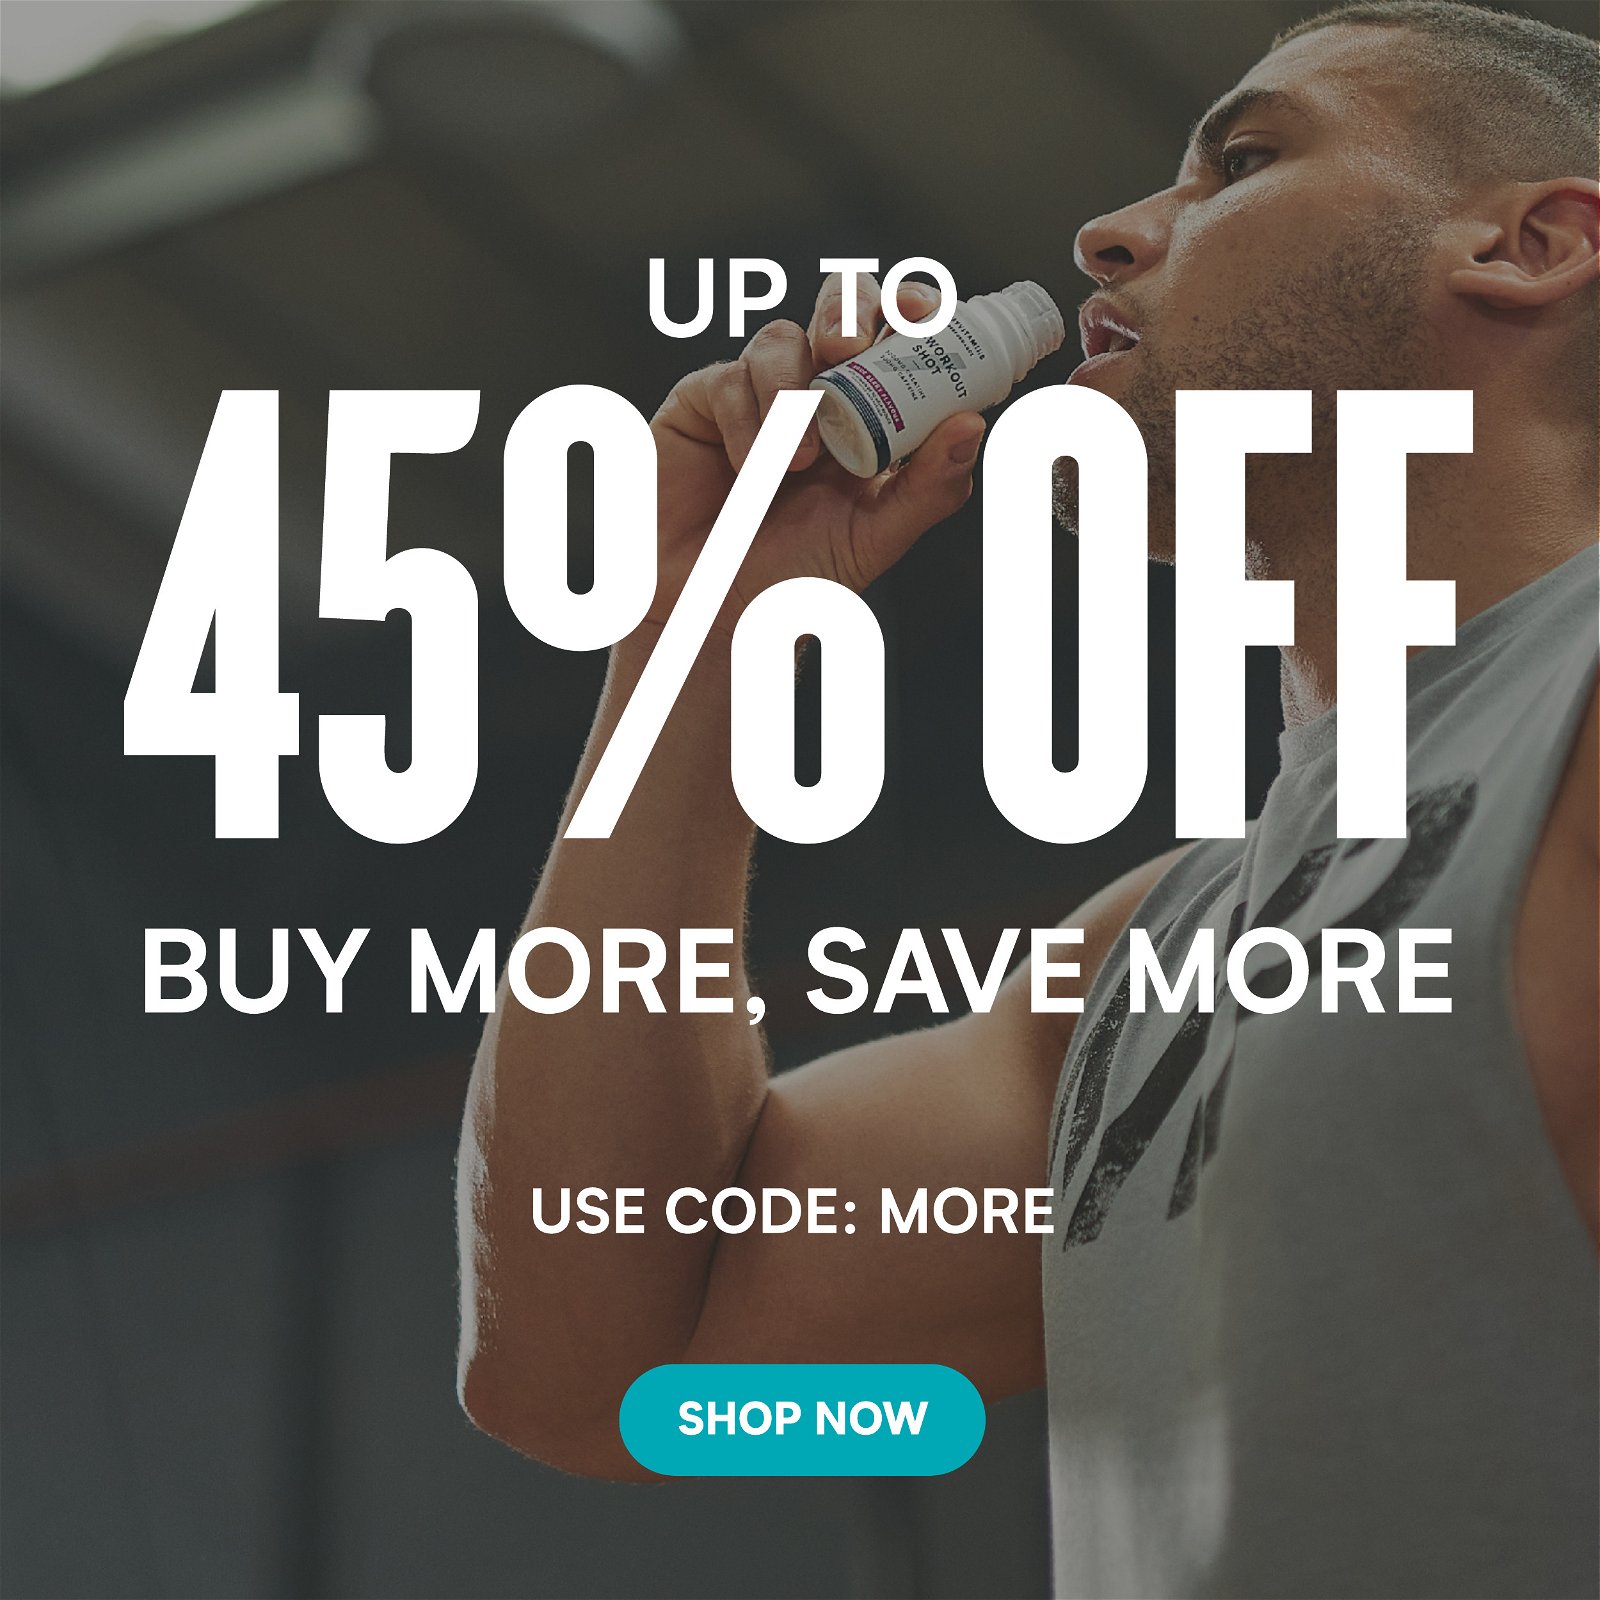 Buy more, save more up to 45% off